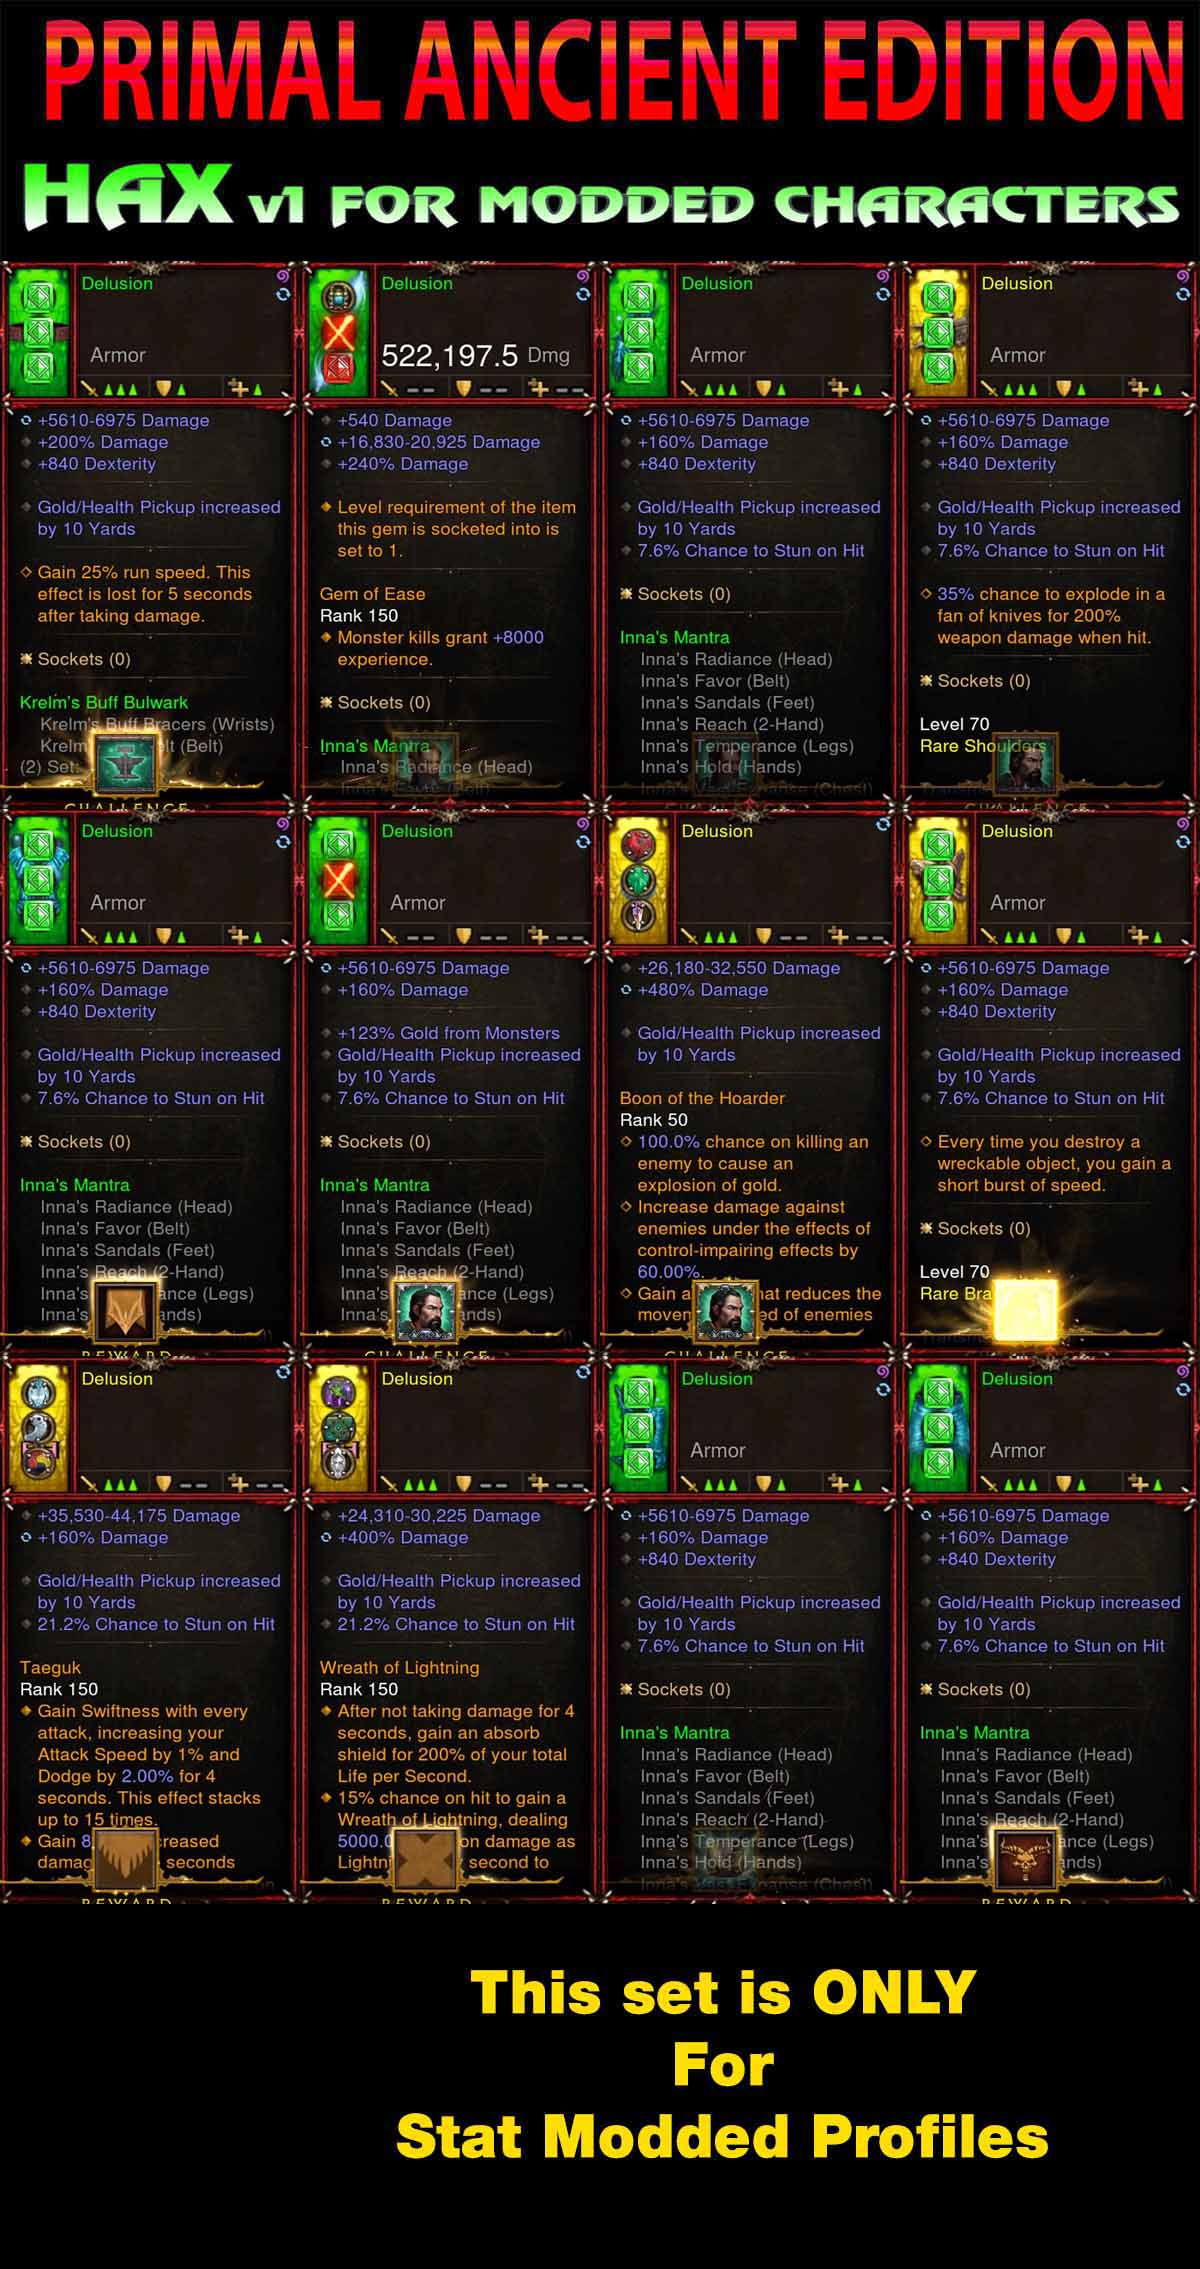 [Primal Ancient] [Quad DPS] Hax v1 Innas Monk Set Delusion, Mass Spawns, PickUp Radius Diablo 3 Mods ROS Seasonal and Non Seasonal Save Mod - Modded Items and Gear - Hacks - Cheats - Trainers for Playstation 4 - Playstation 5 - Nintendo Switch - Xbox One